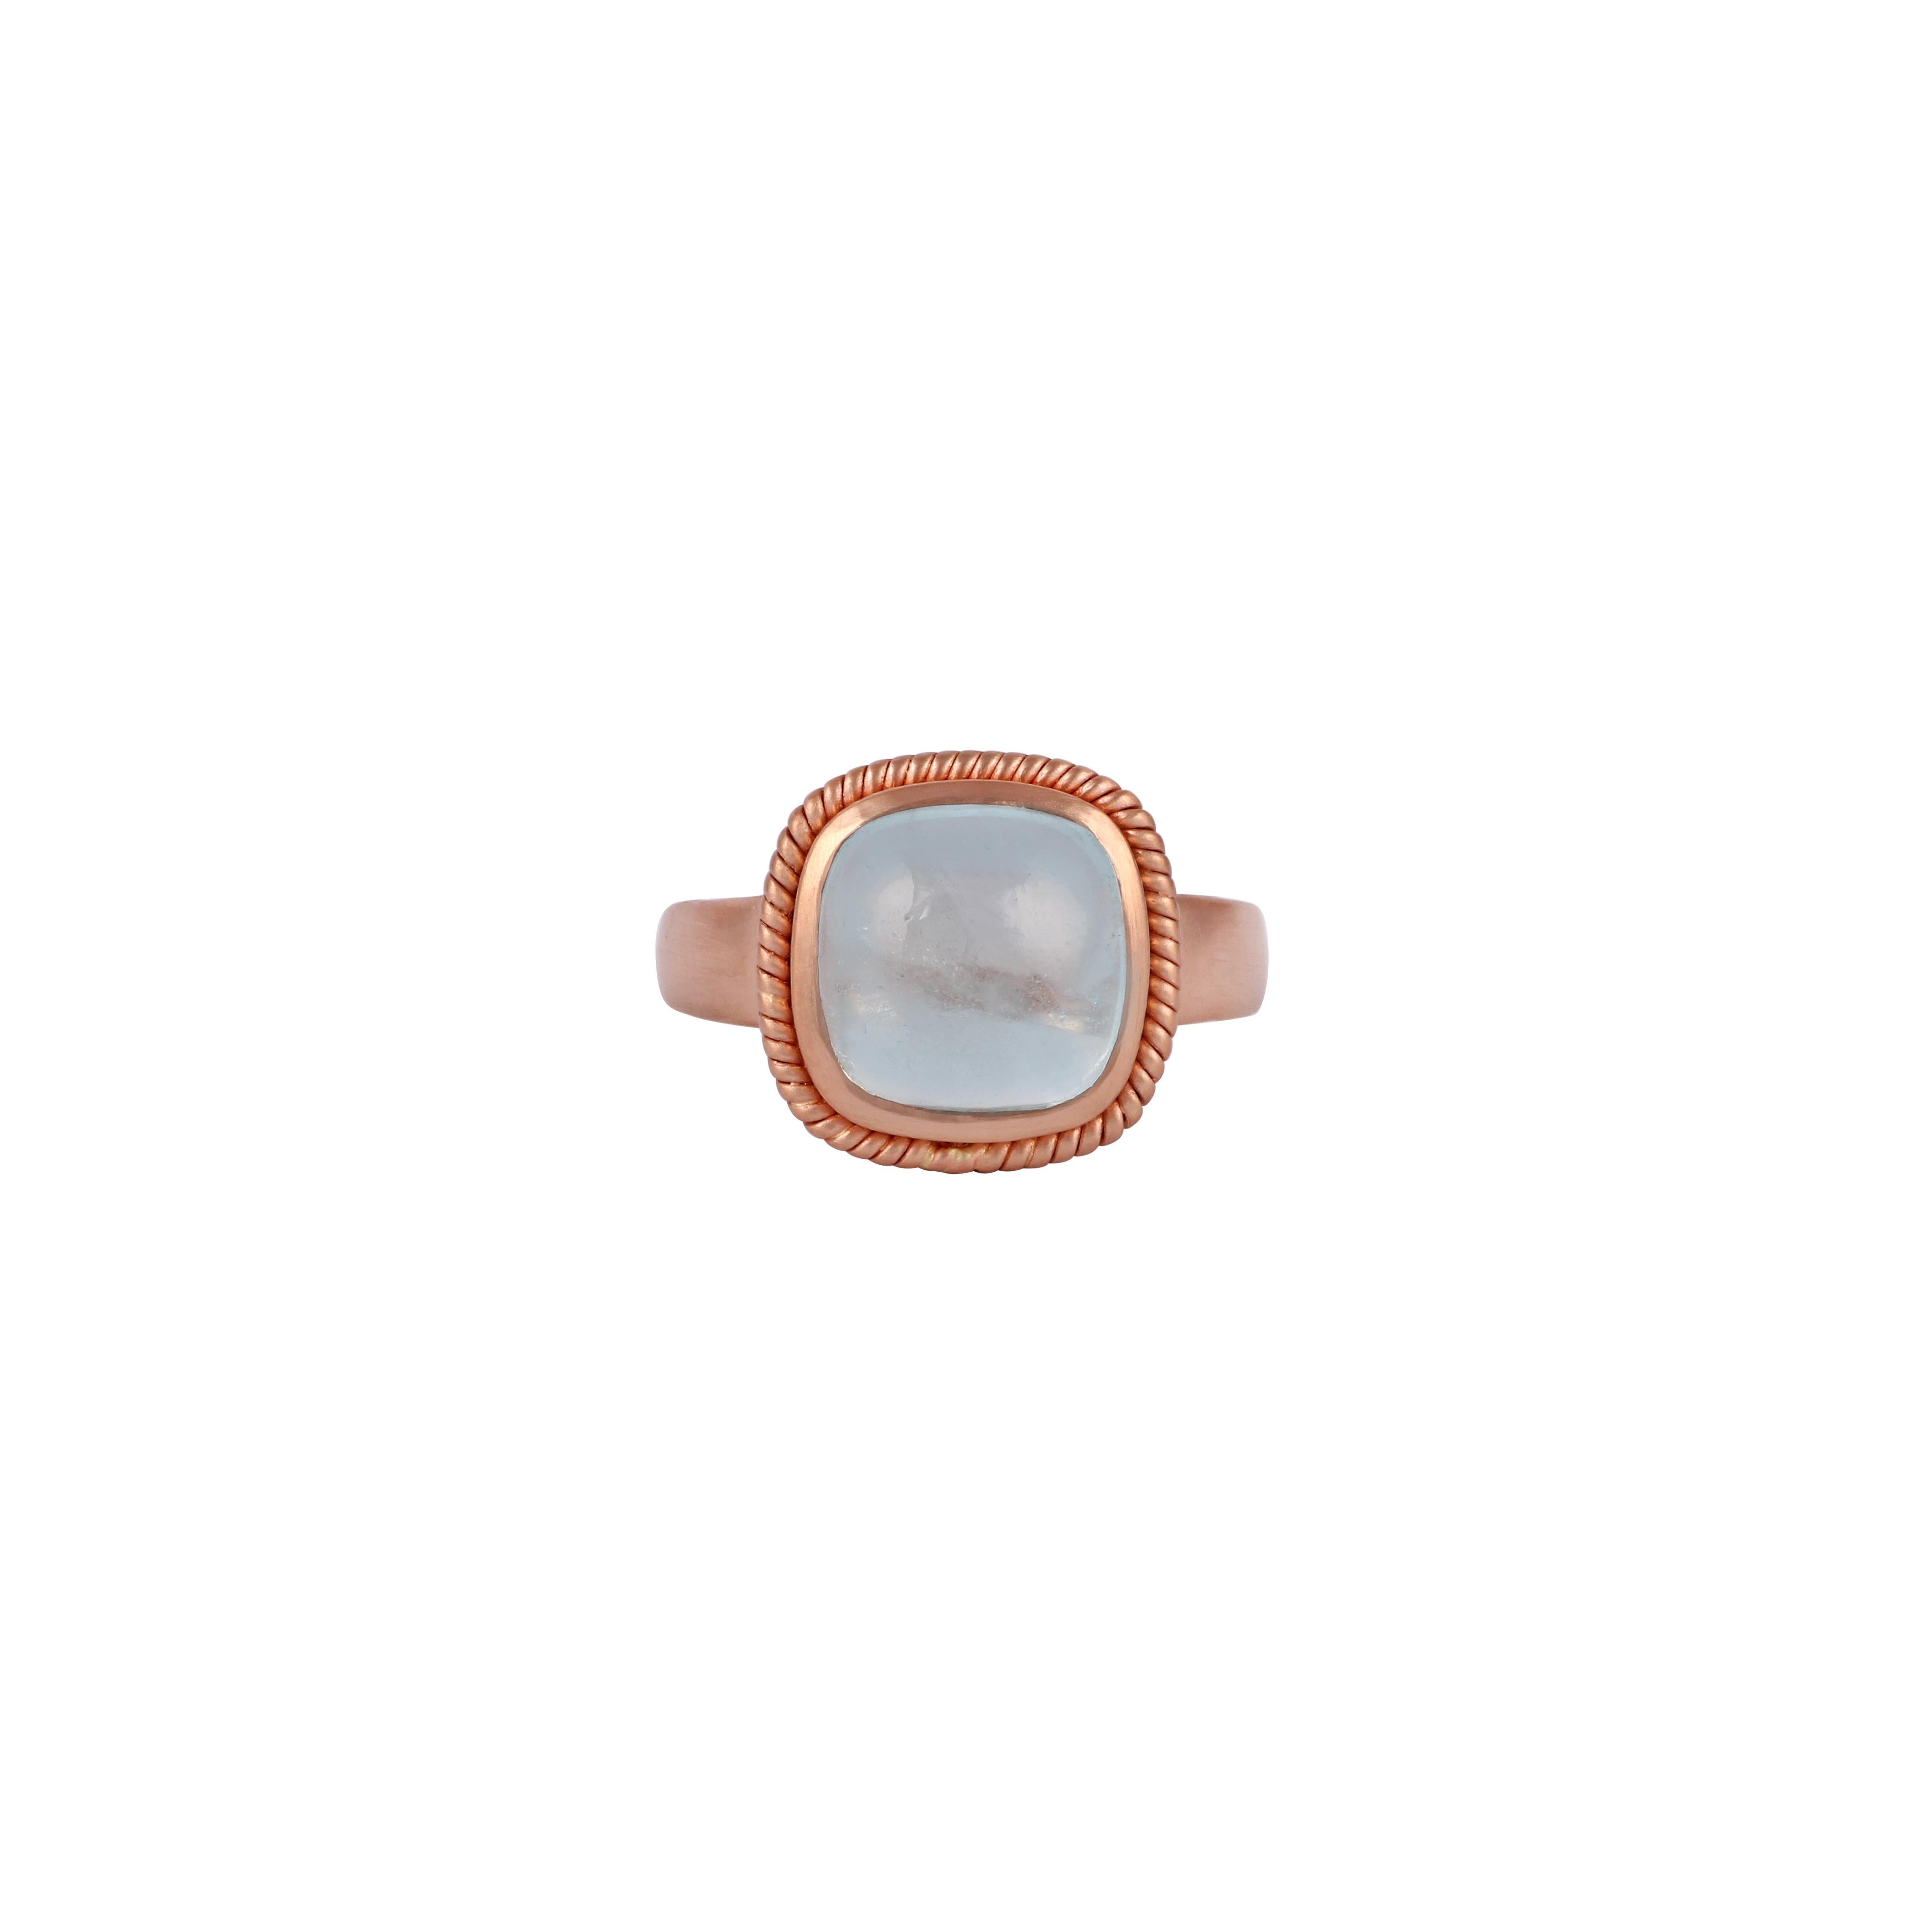 Its a classic ring studded in rose gold with cabochon shaped 4.40 carat aquamarine in a close setting, this entire ring is studded in 18k rose gold weight 5.14 grams, ring size can be change as per the requirement, its an elegant wearable ring. 